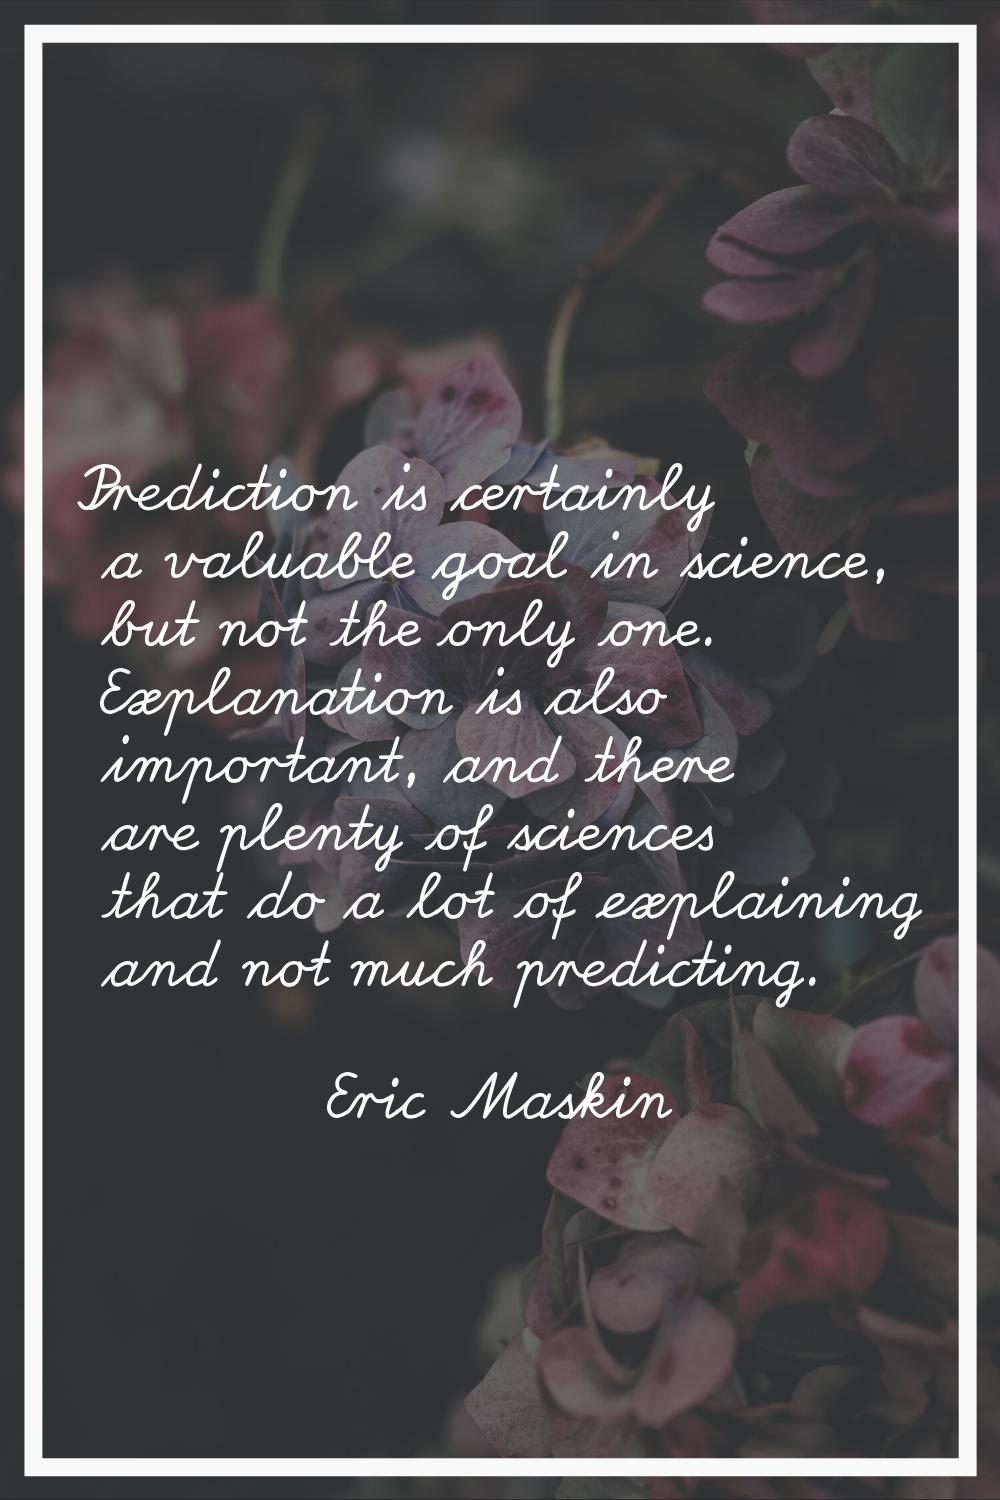 Prediction is certainly a valuable goal in science, but not the only one. Explanation is also impor